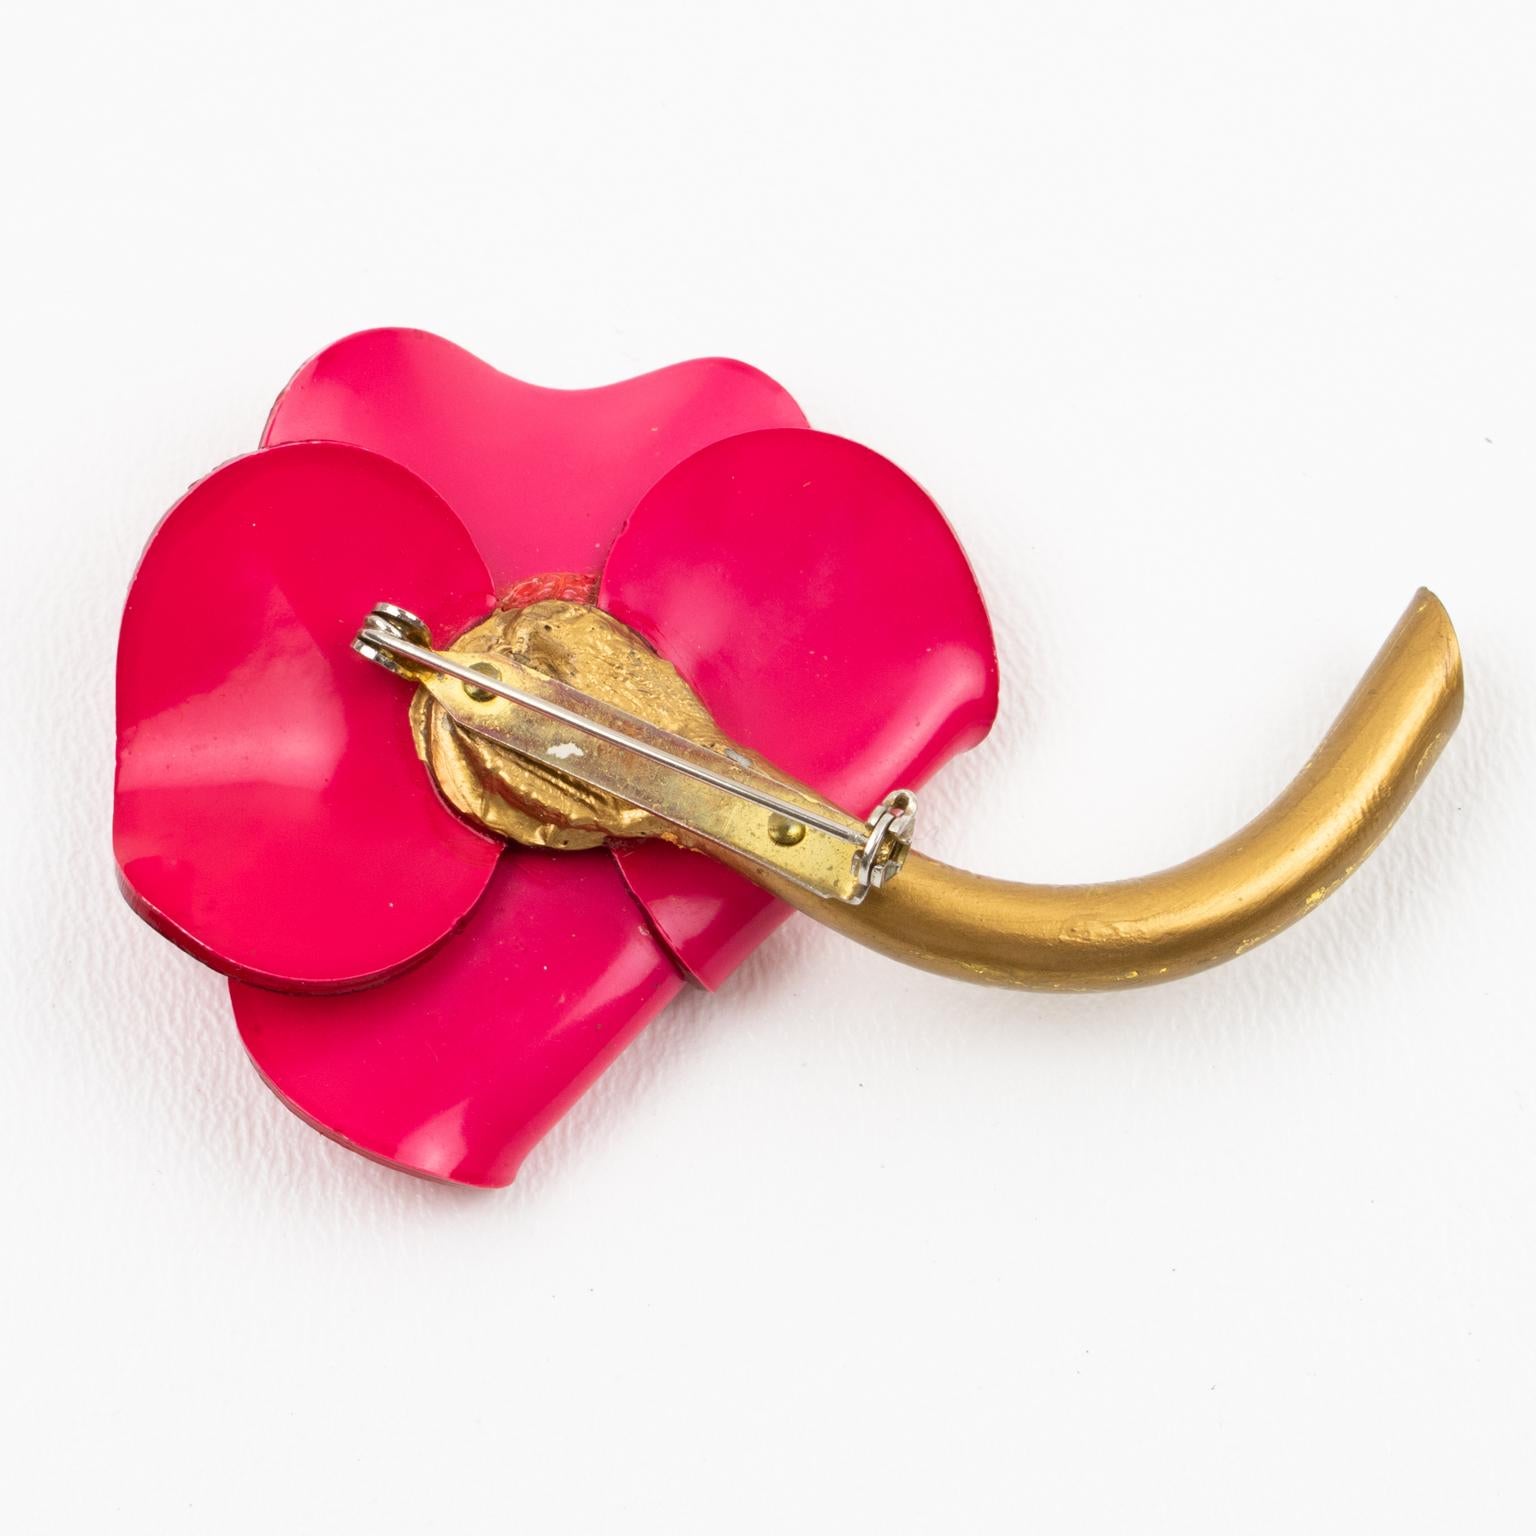 Modern Francoise Montague by Cilea Resin Pin Brooch Red Poppy Flower